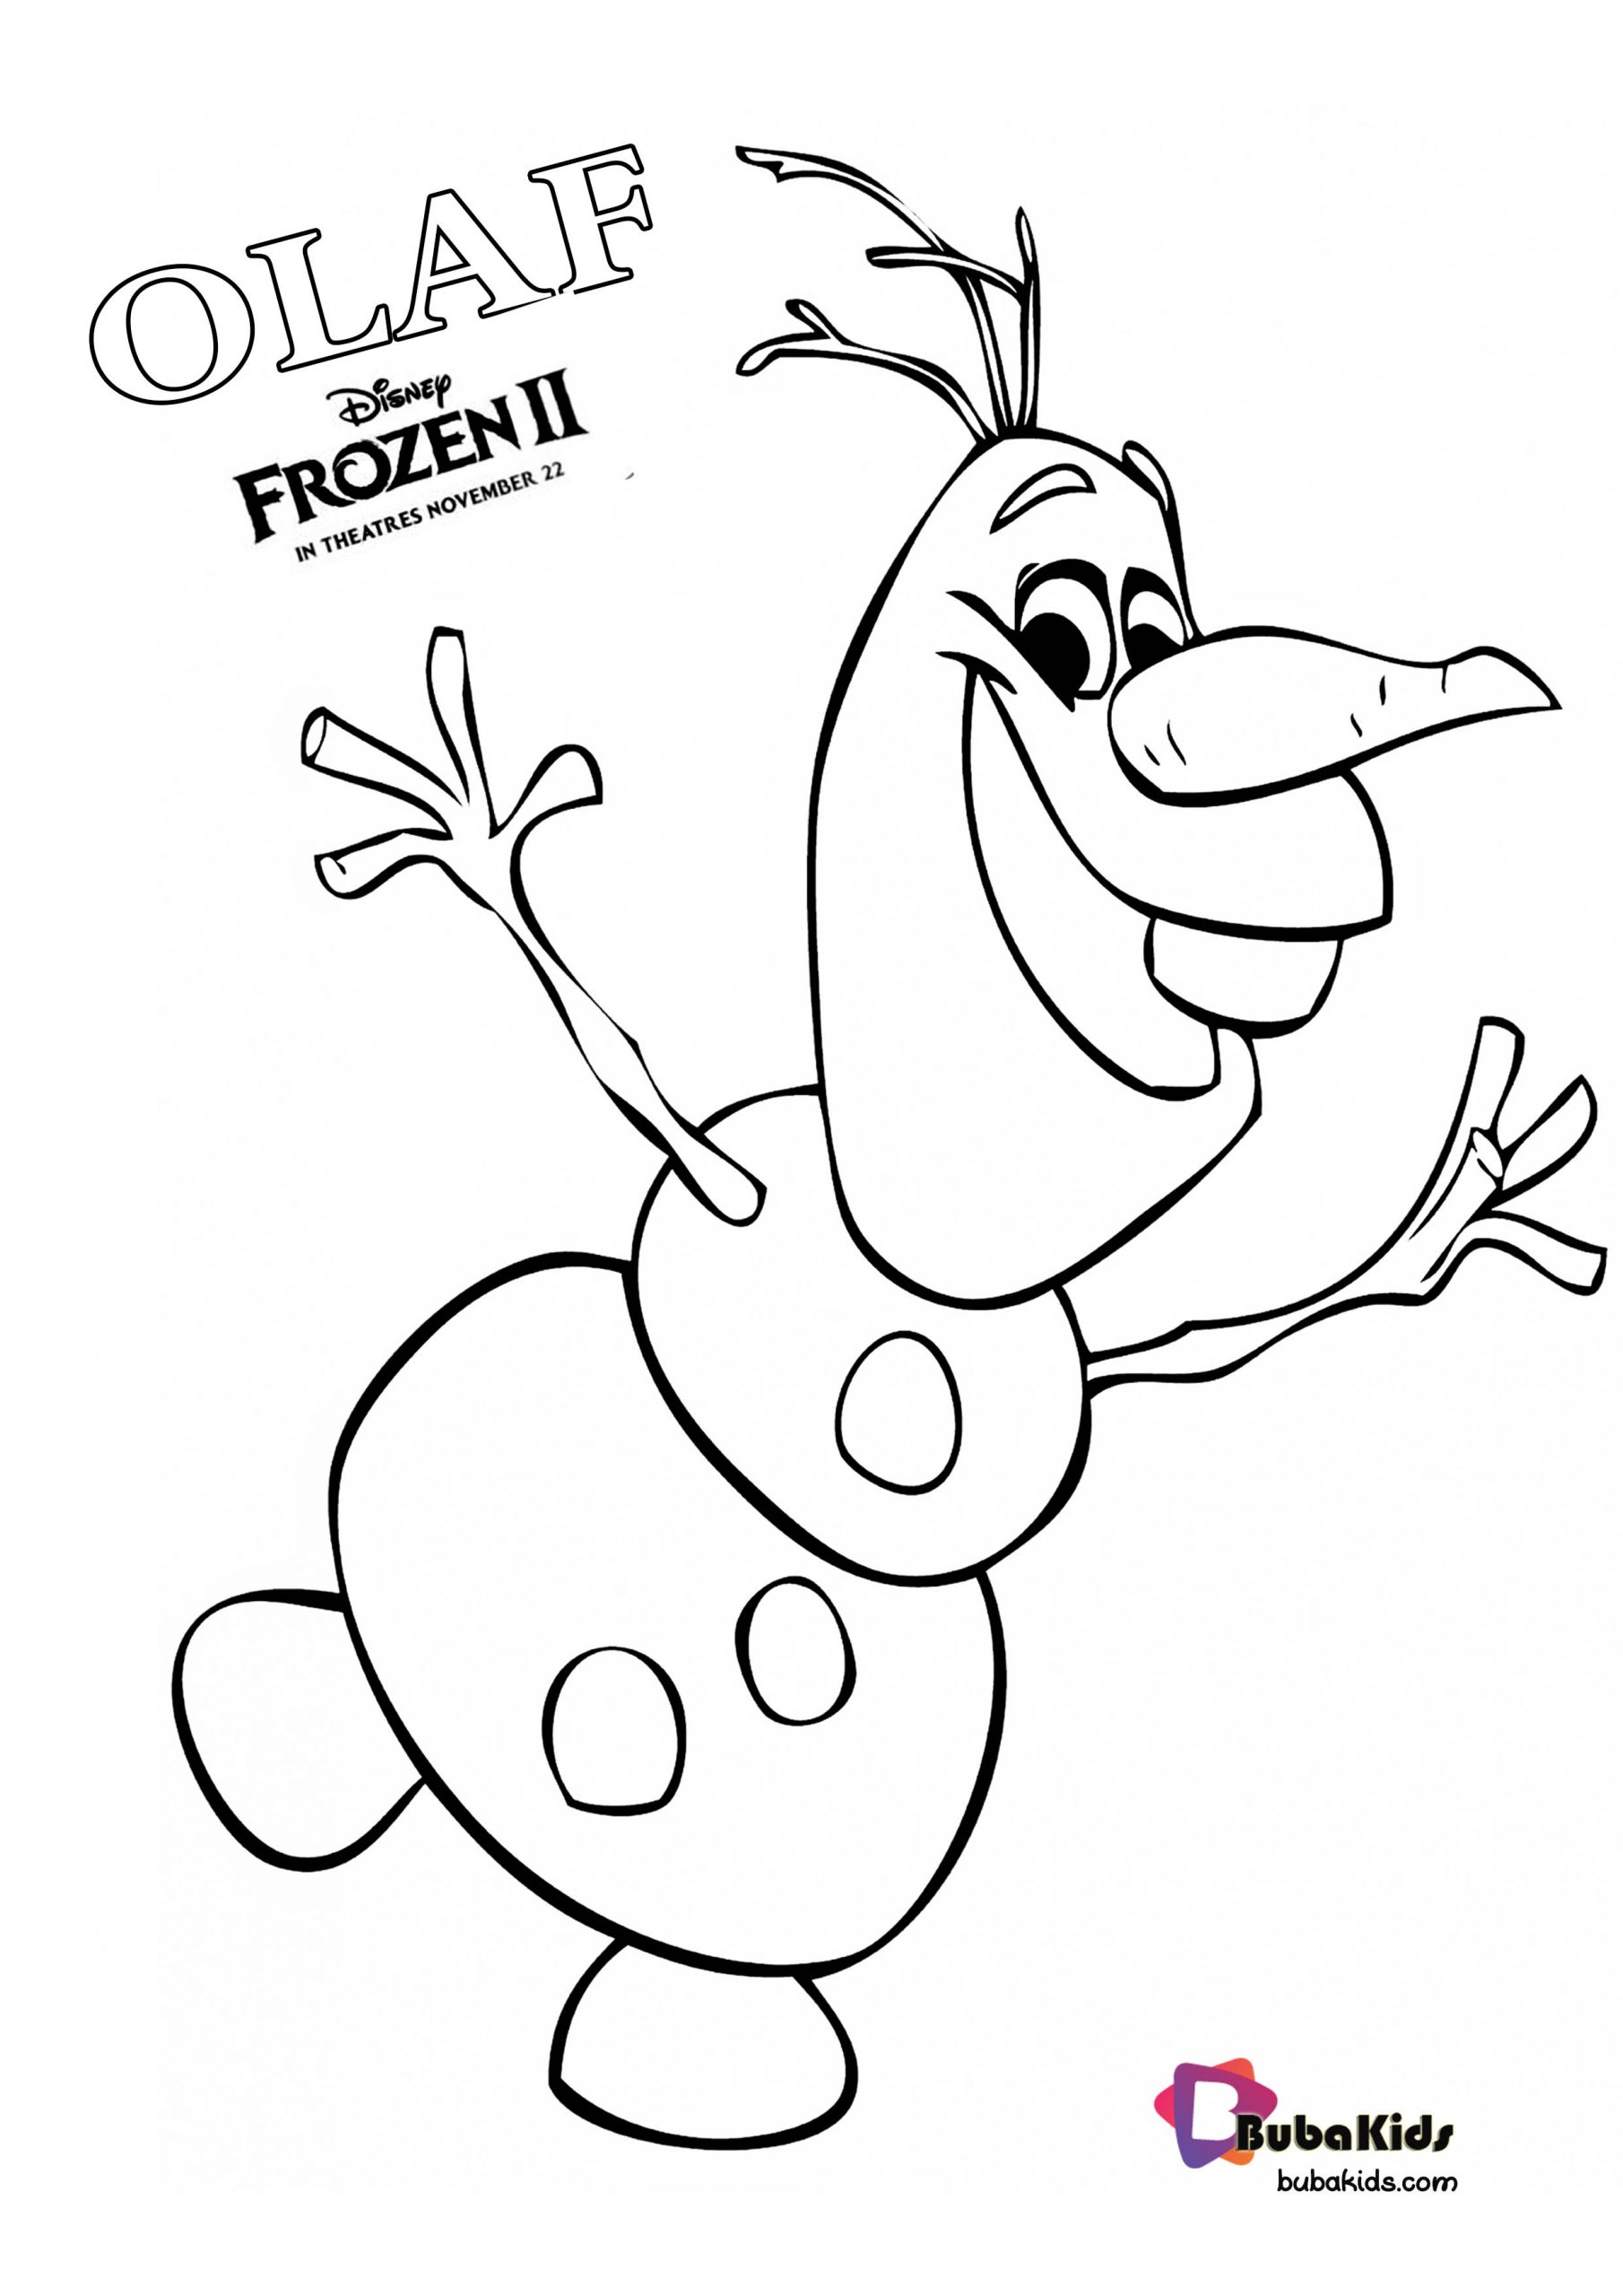 Olaf Frozen 2 Coloring Page Wallpaper